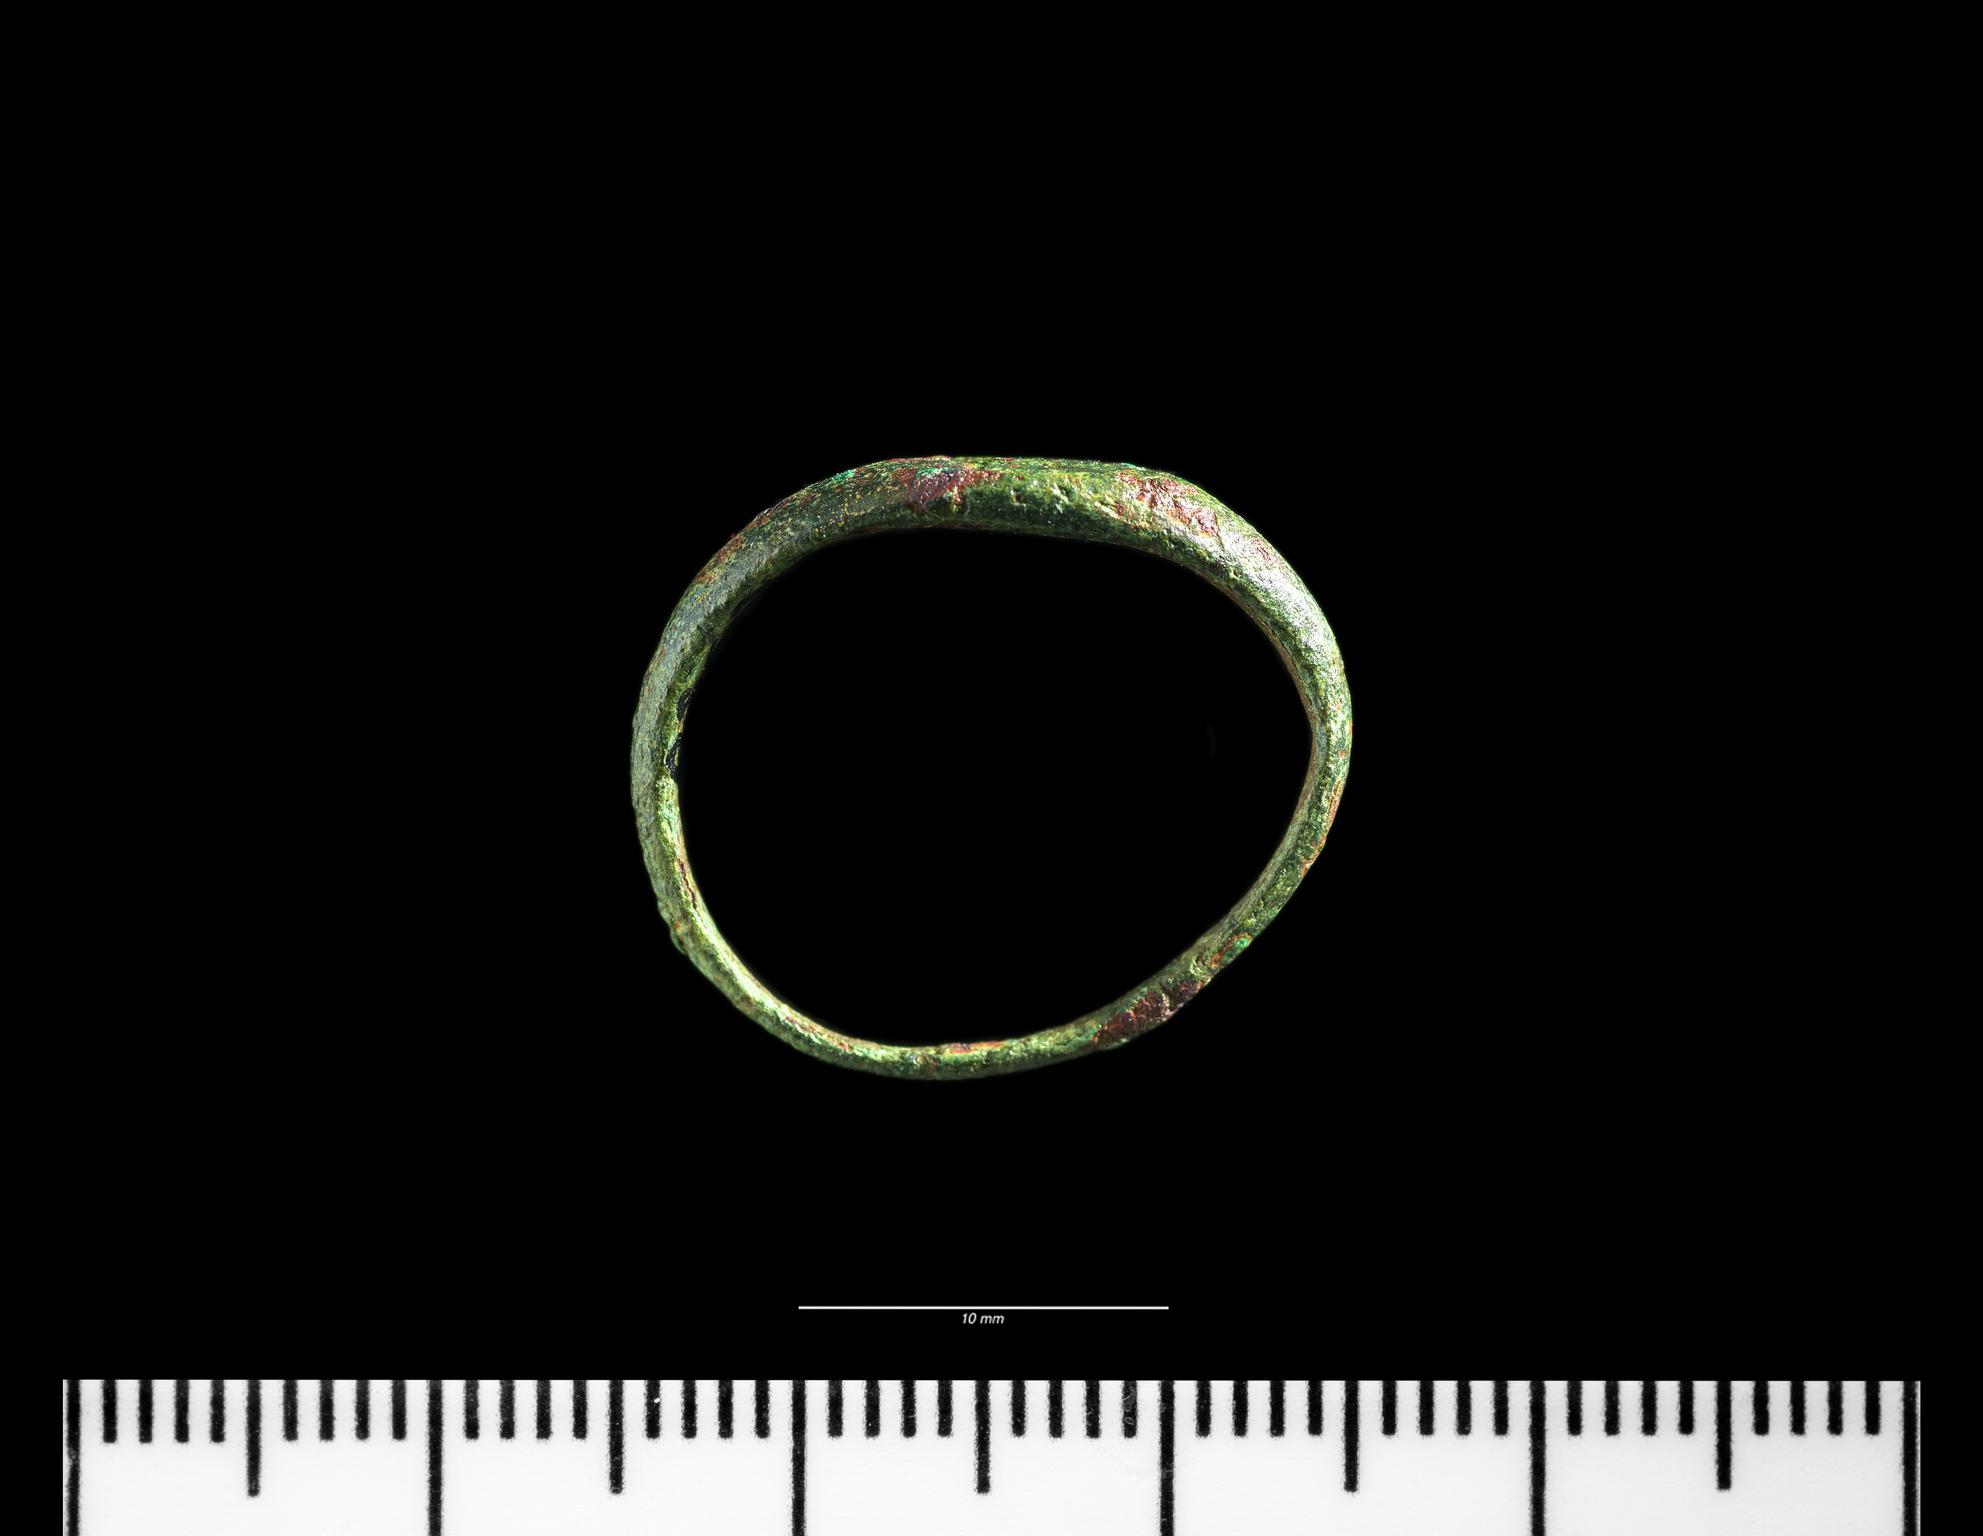 Roman copper alloy finger ring with capricorn engraving